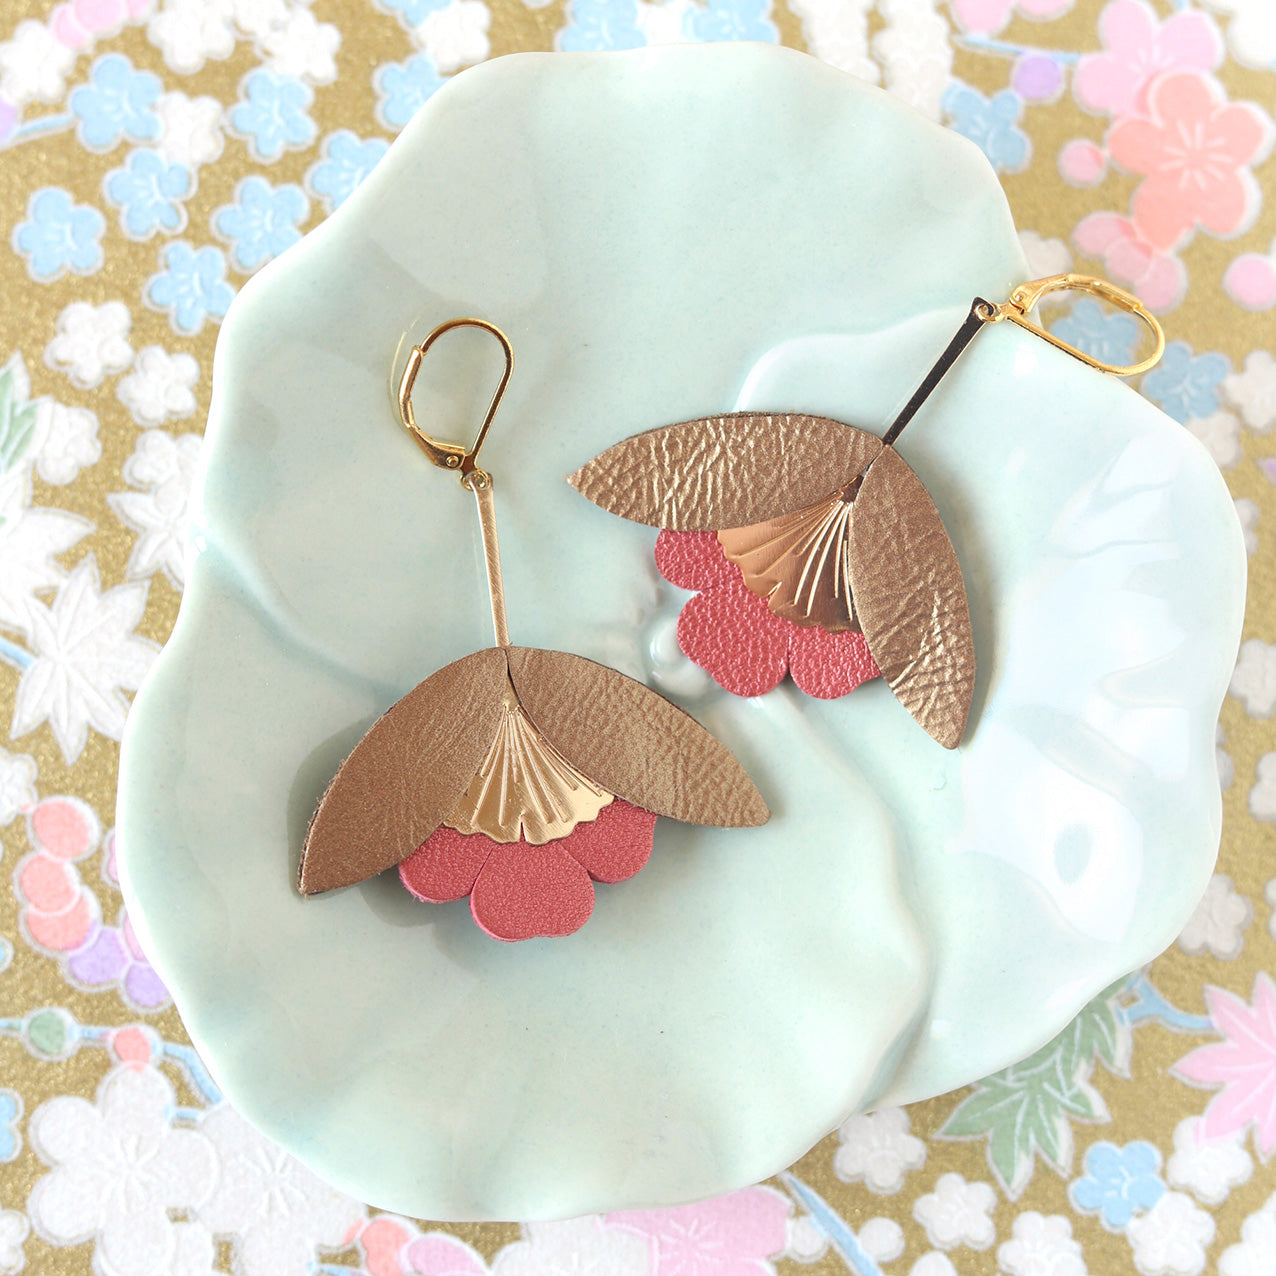 Ginkgo Flower earrings in bronze and copper red leather